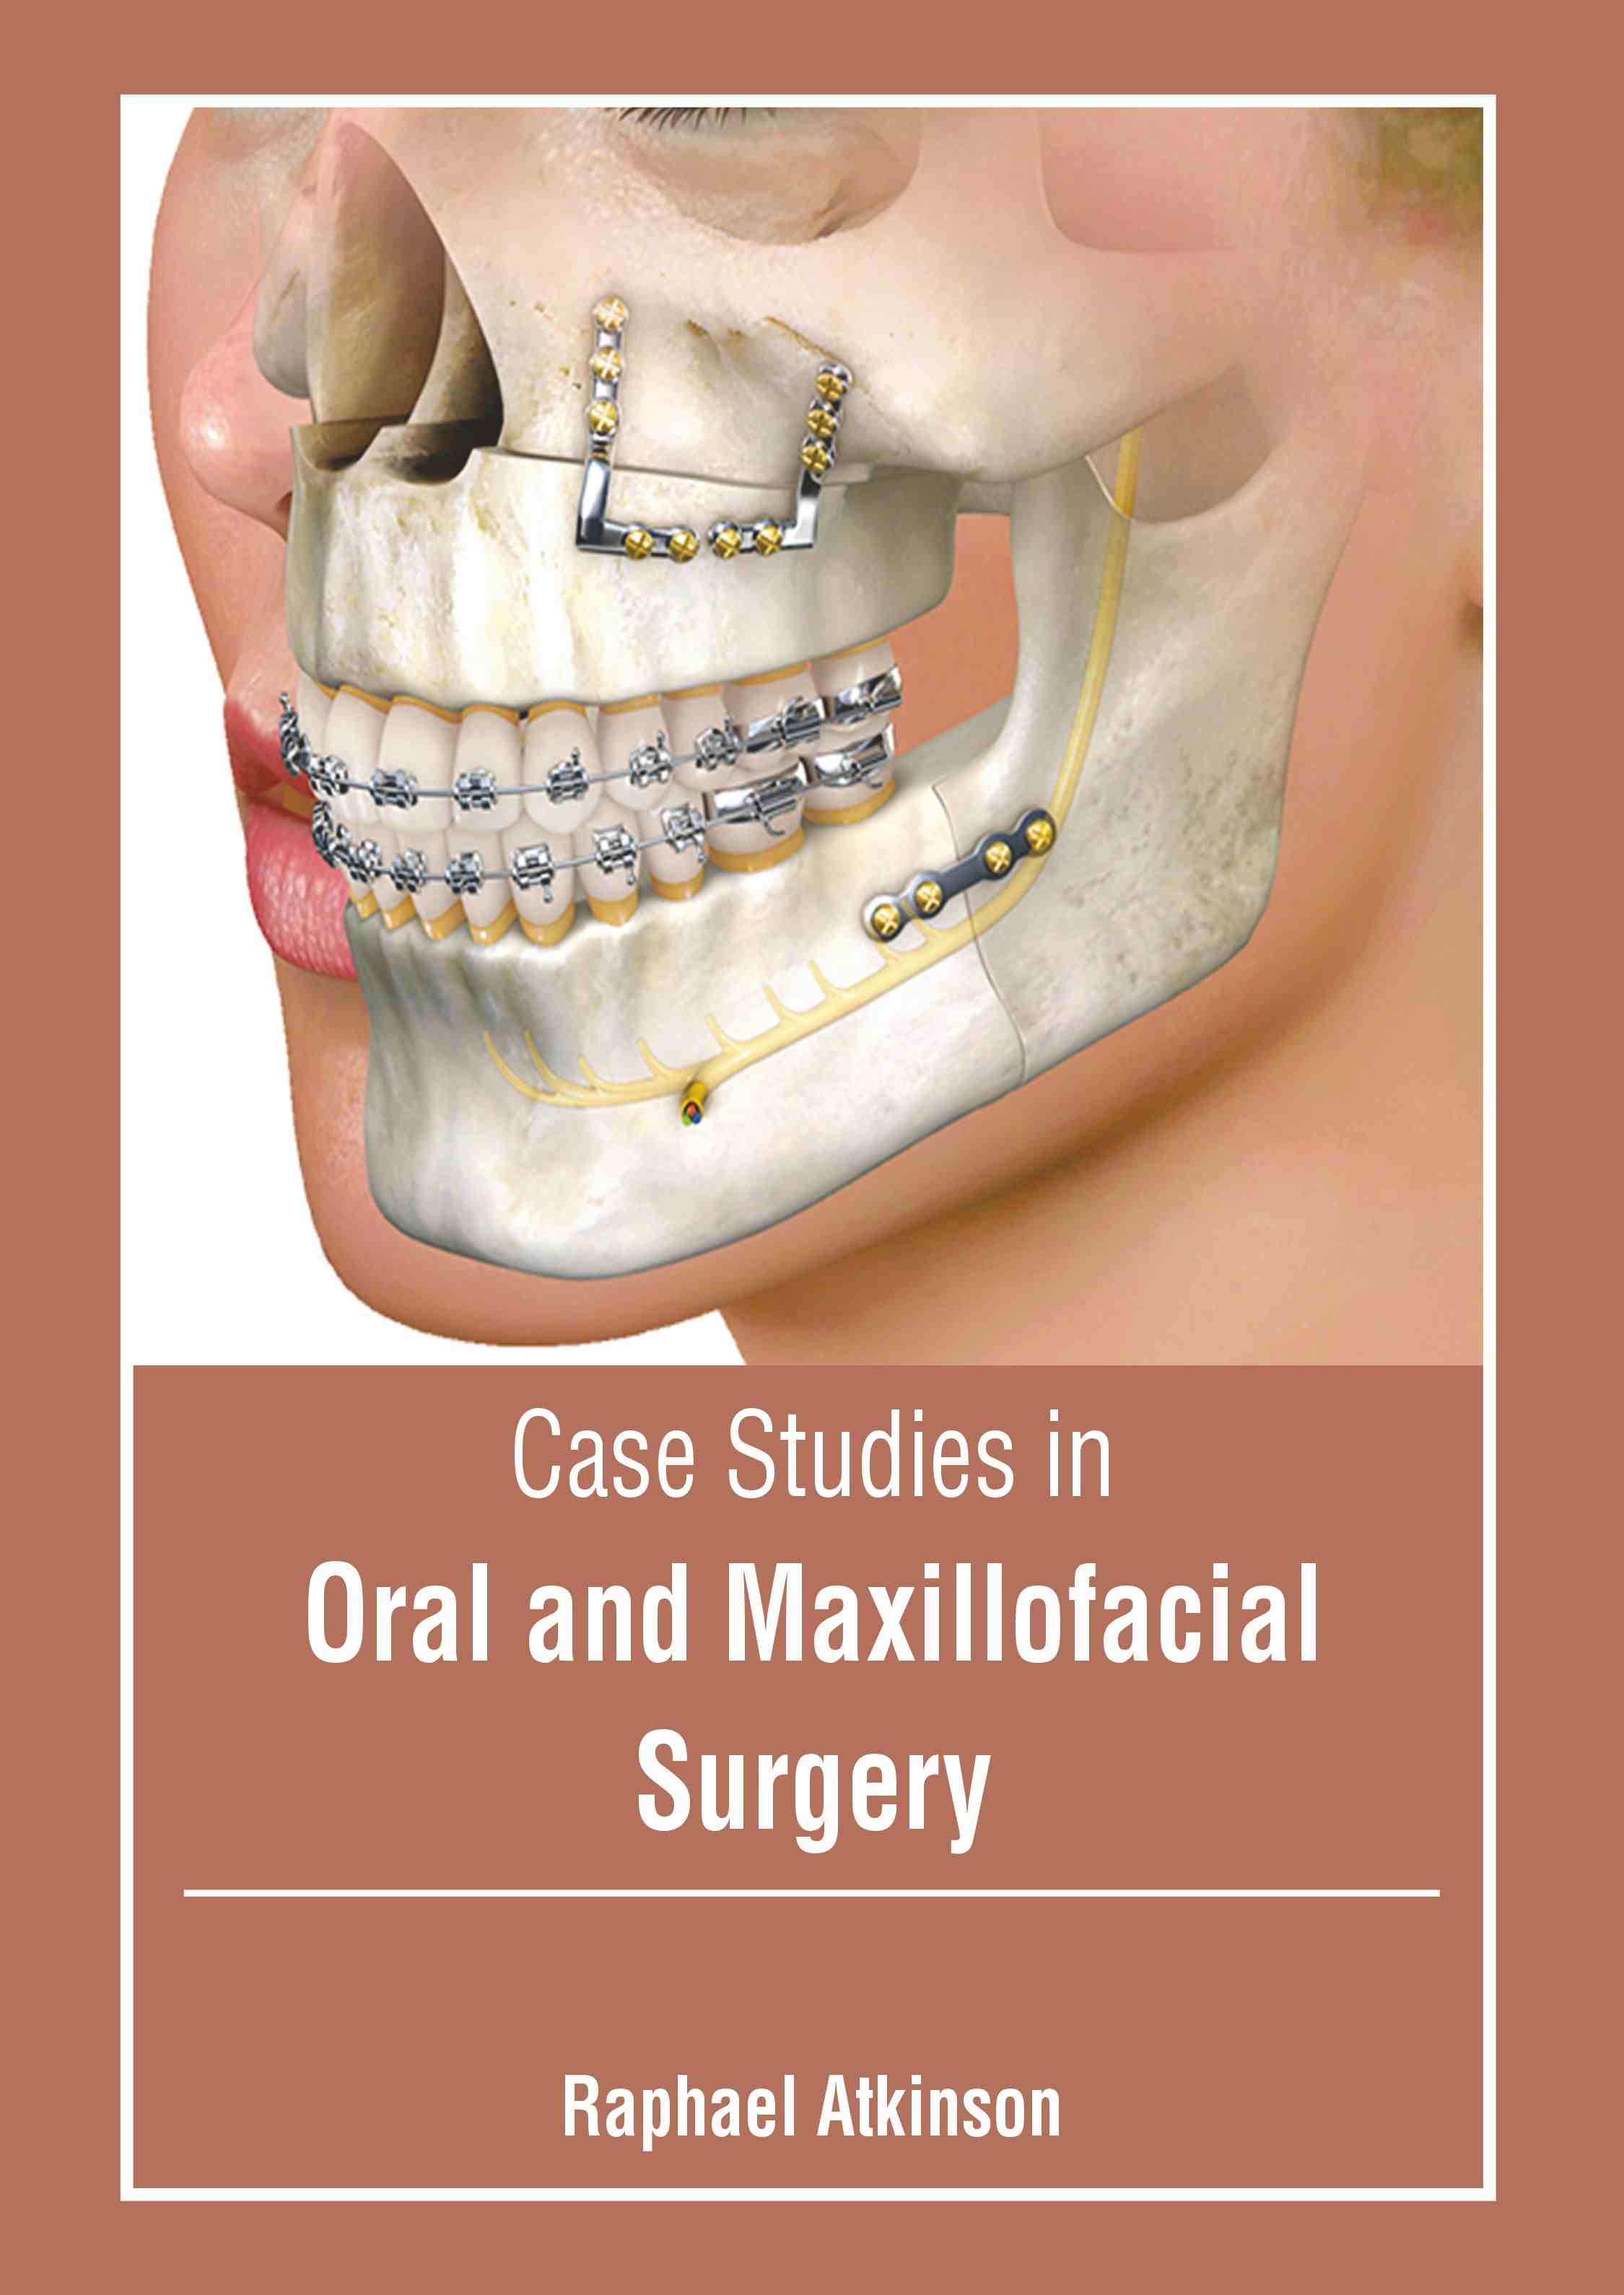 

exclusive-publishers/american-medical-publishers/case-studies-in-oral-and-maxillofacial-surgery-9798887406114